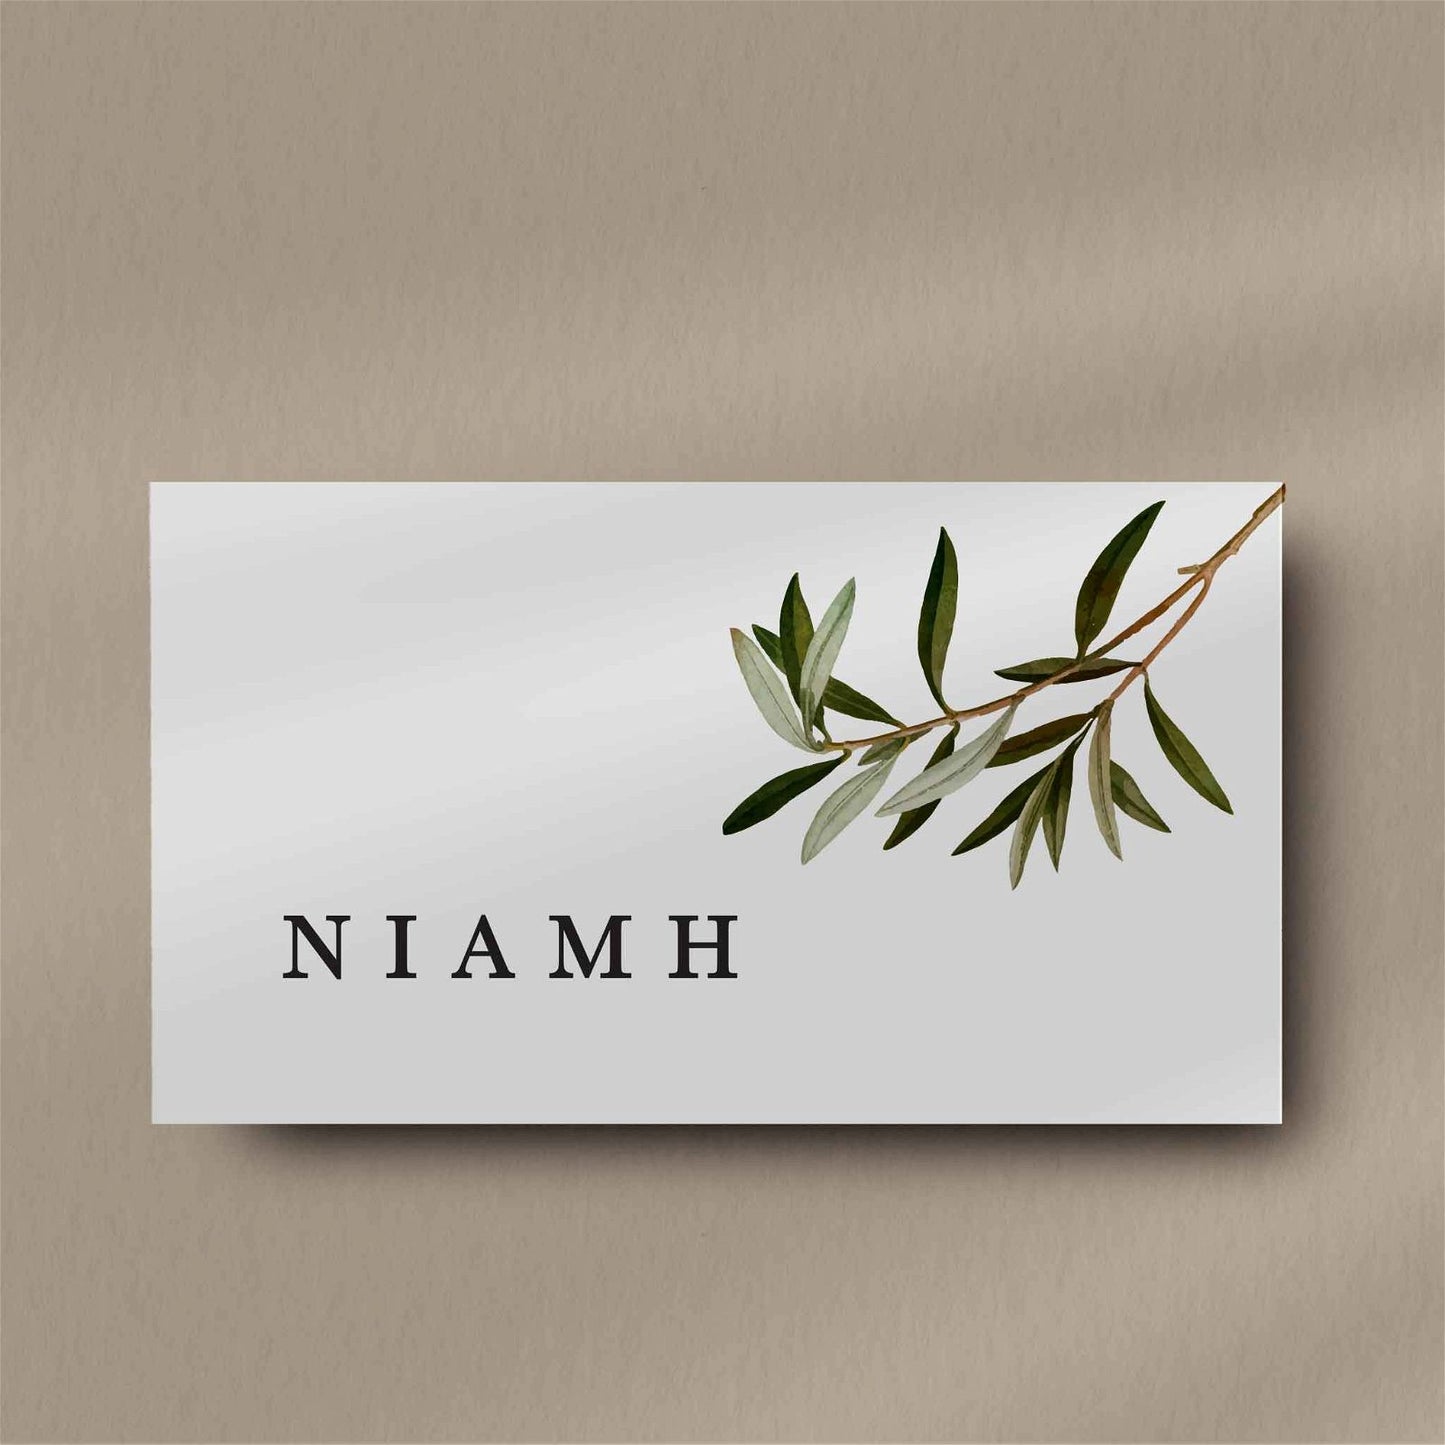 Niamh Place Card  Ivy and Gold Wedding Stationery   